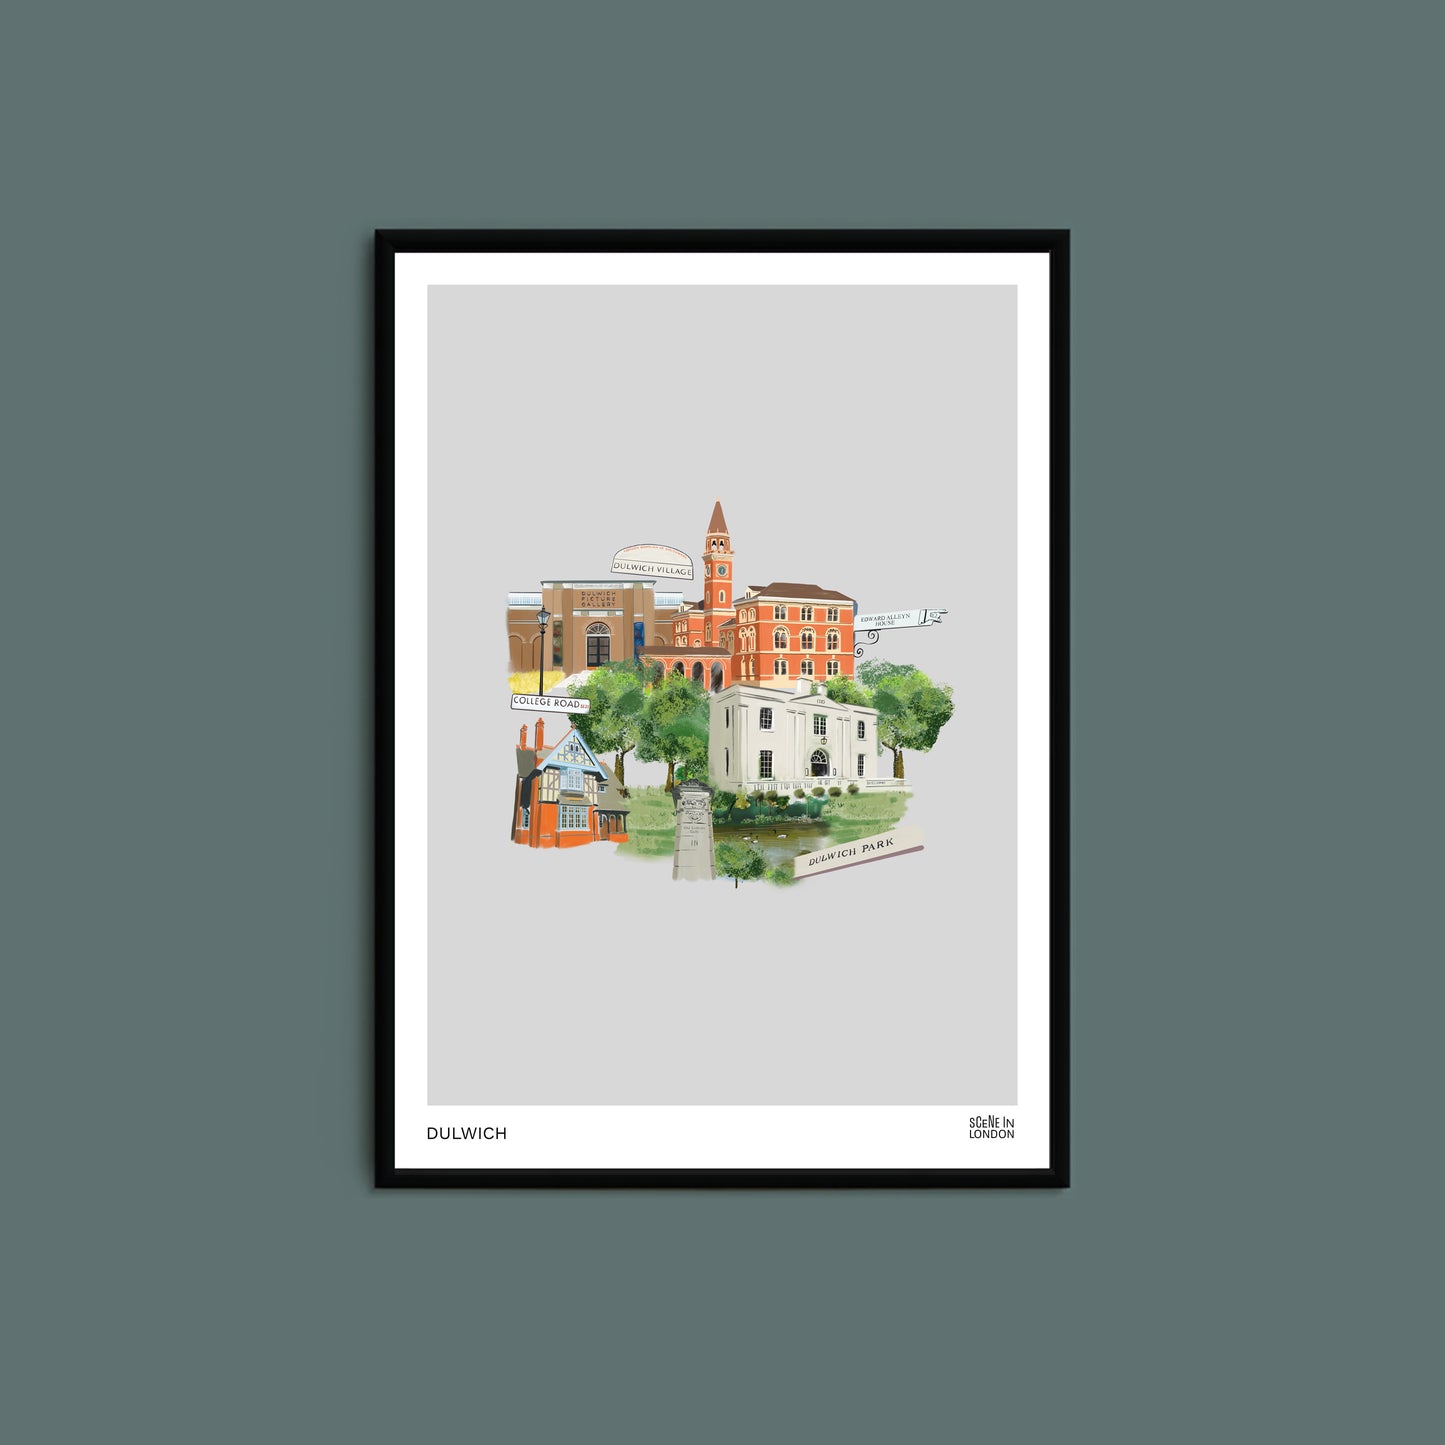 Dulwich art print of places in Dulwich London